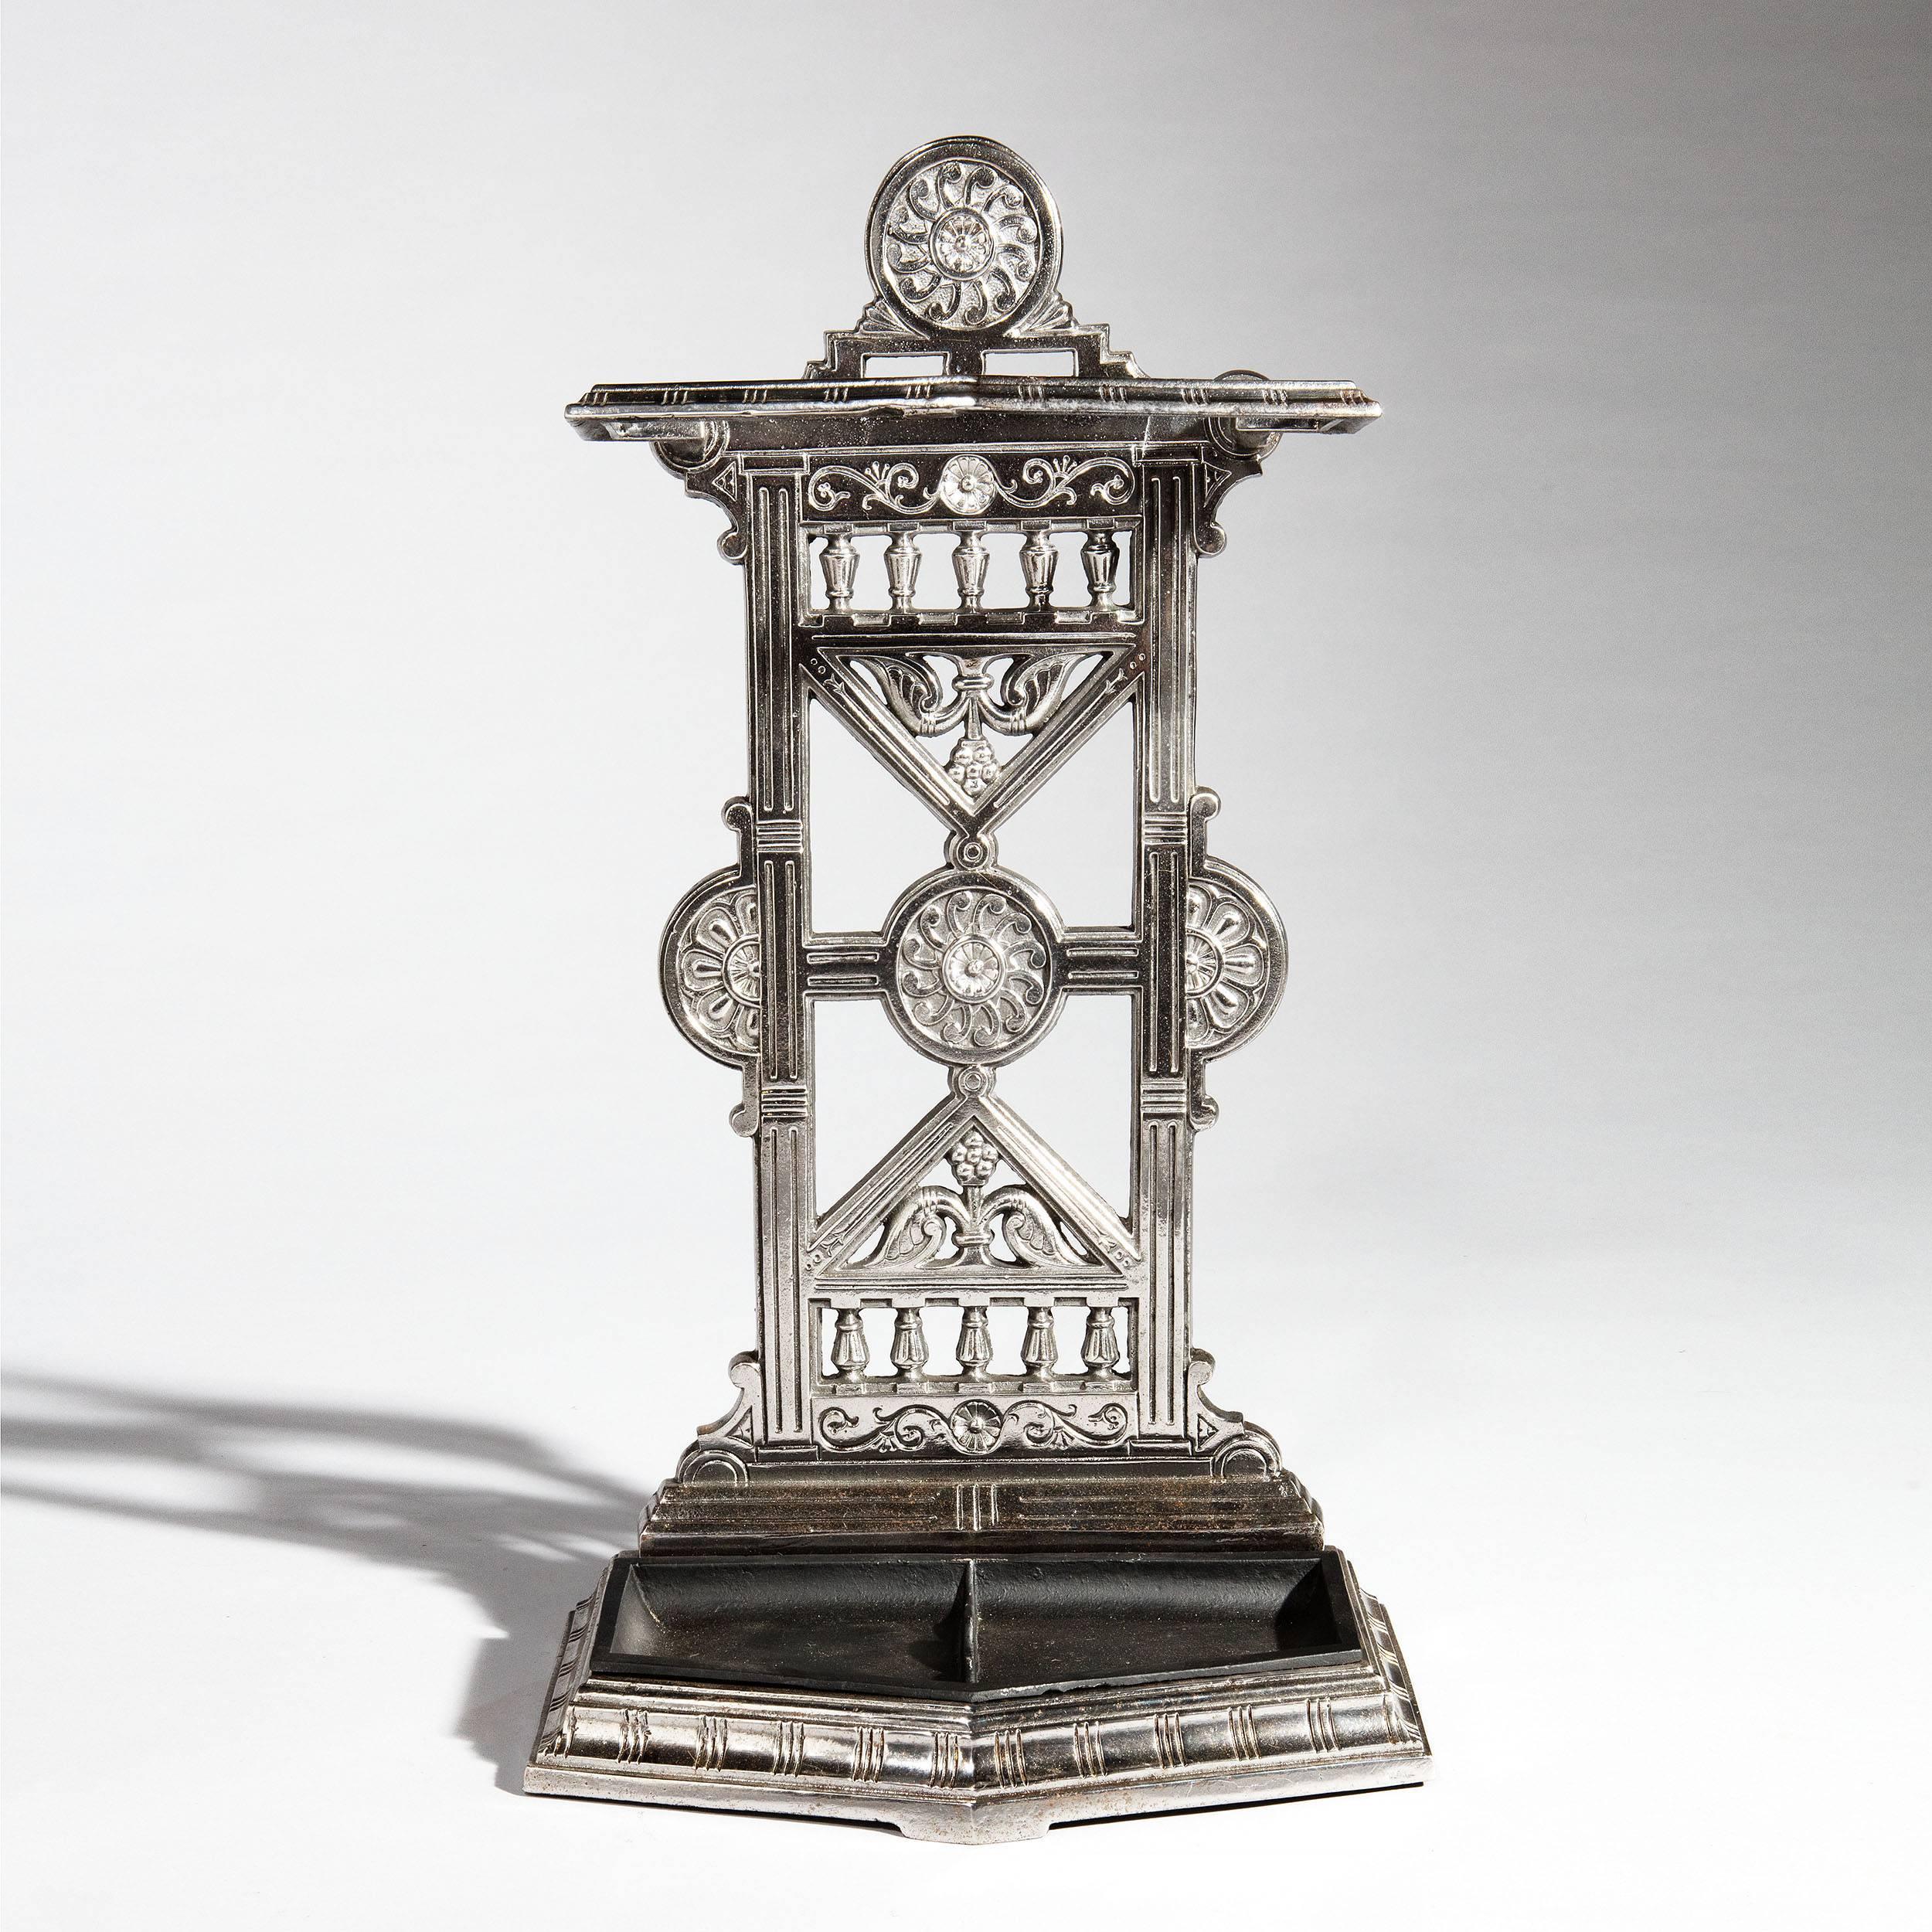 A polished cast iron hall stick stand decorated in relief in the Arts and Crafts japoneserie manner reminiscent of Thomas Jekyll.

The reverse bearing an illegible stamp and the design registration diamond,

England, 1880.

Measures: Height 27